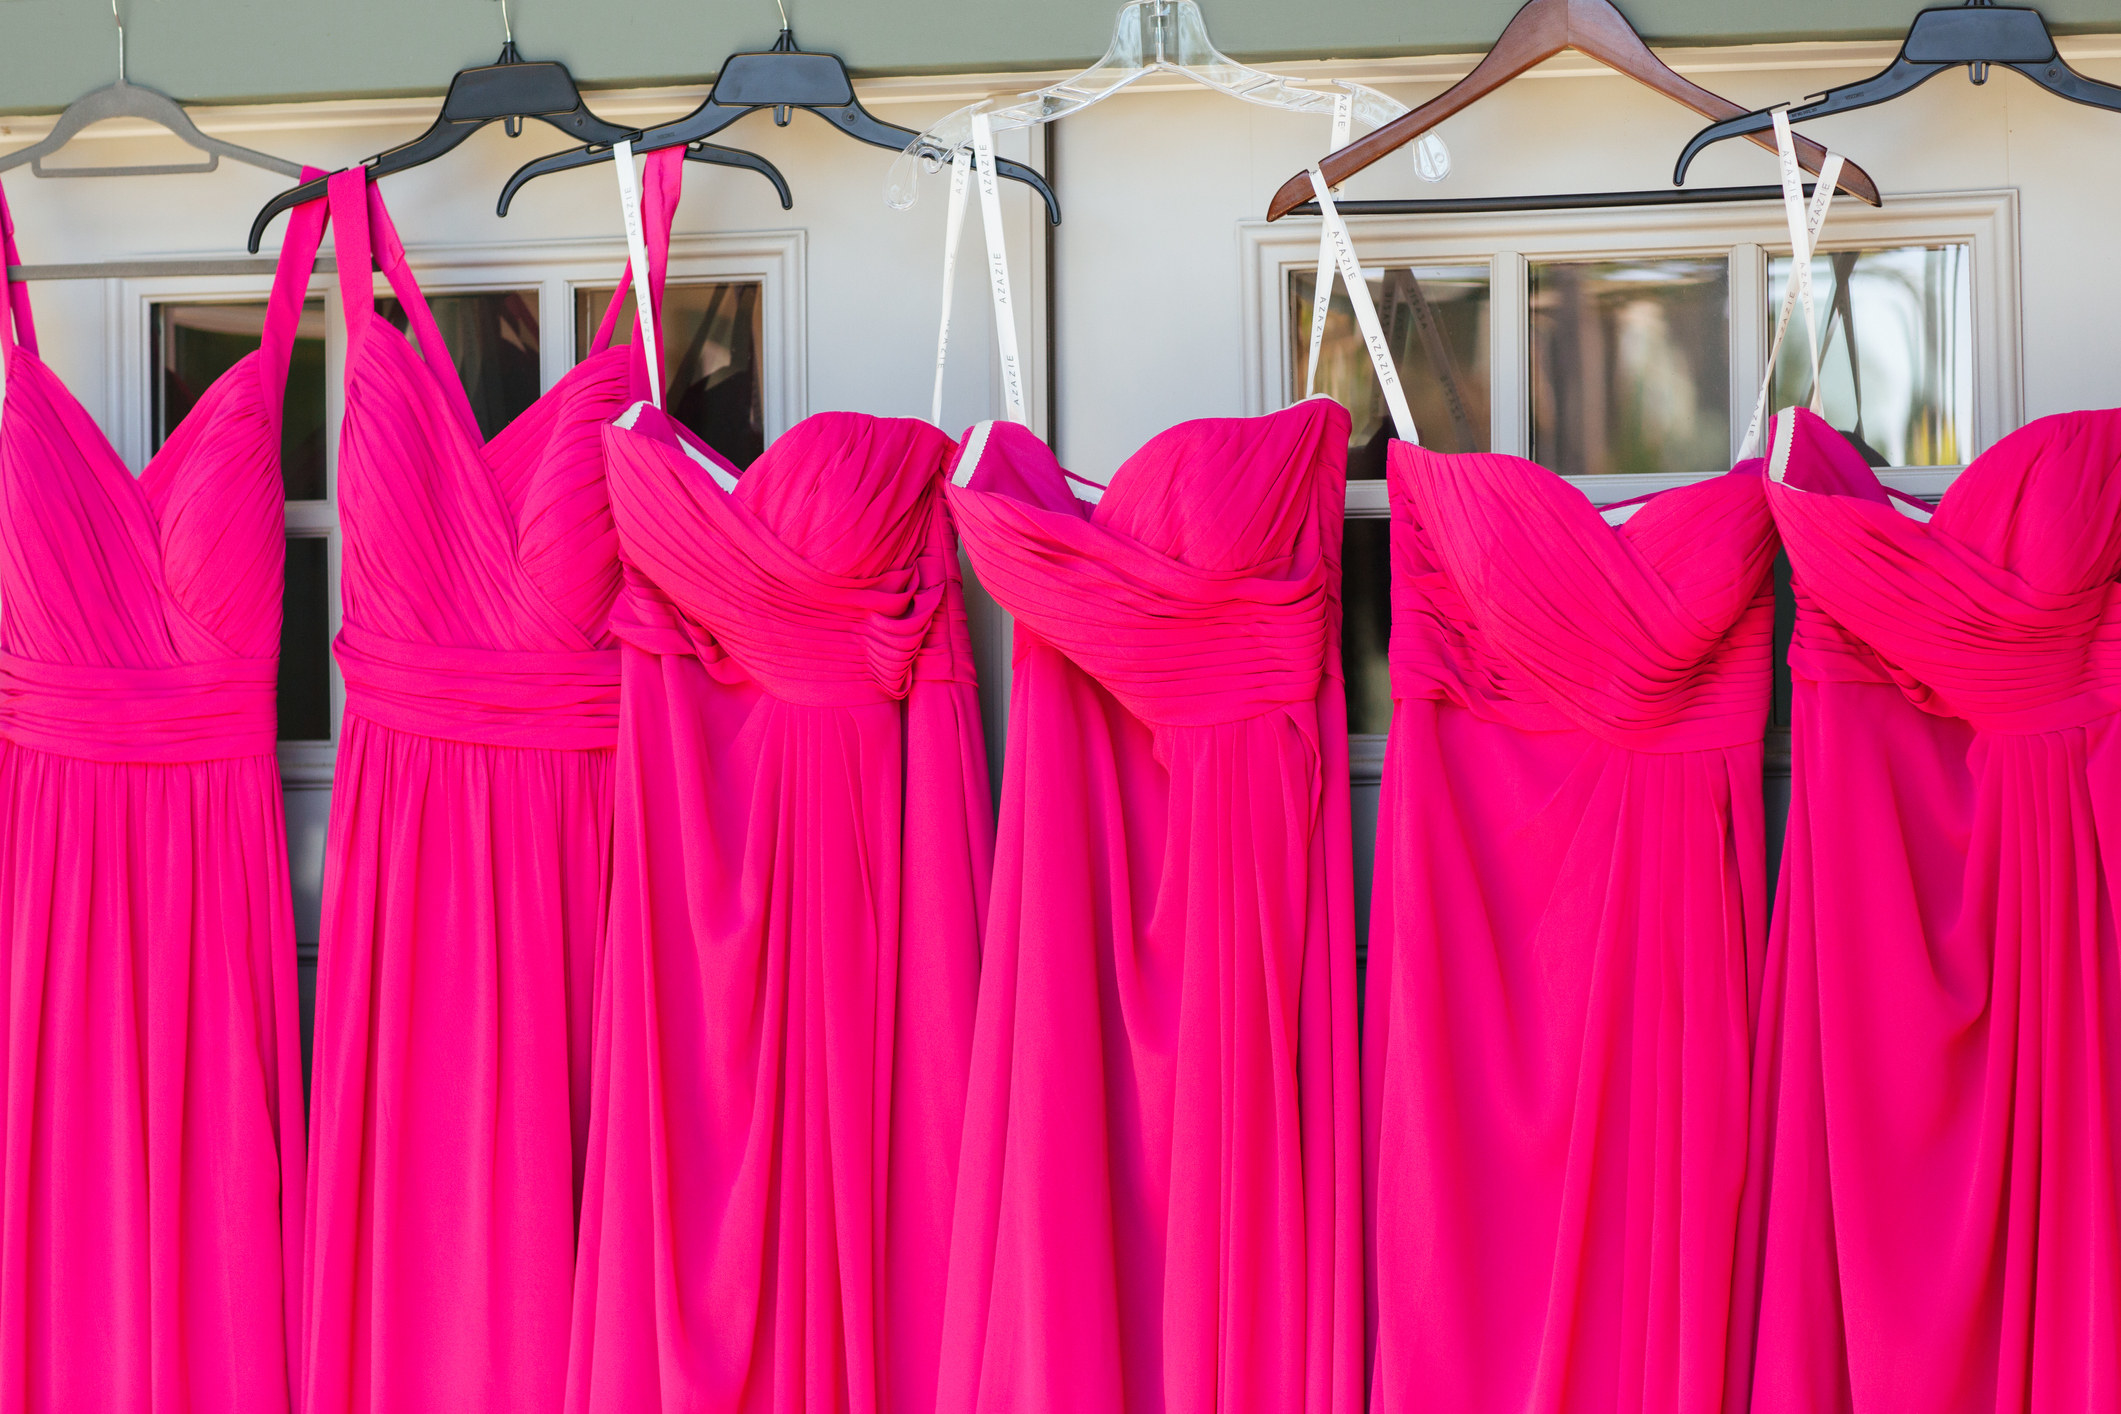 A row of pink dresses on hangers